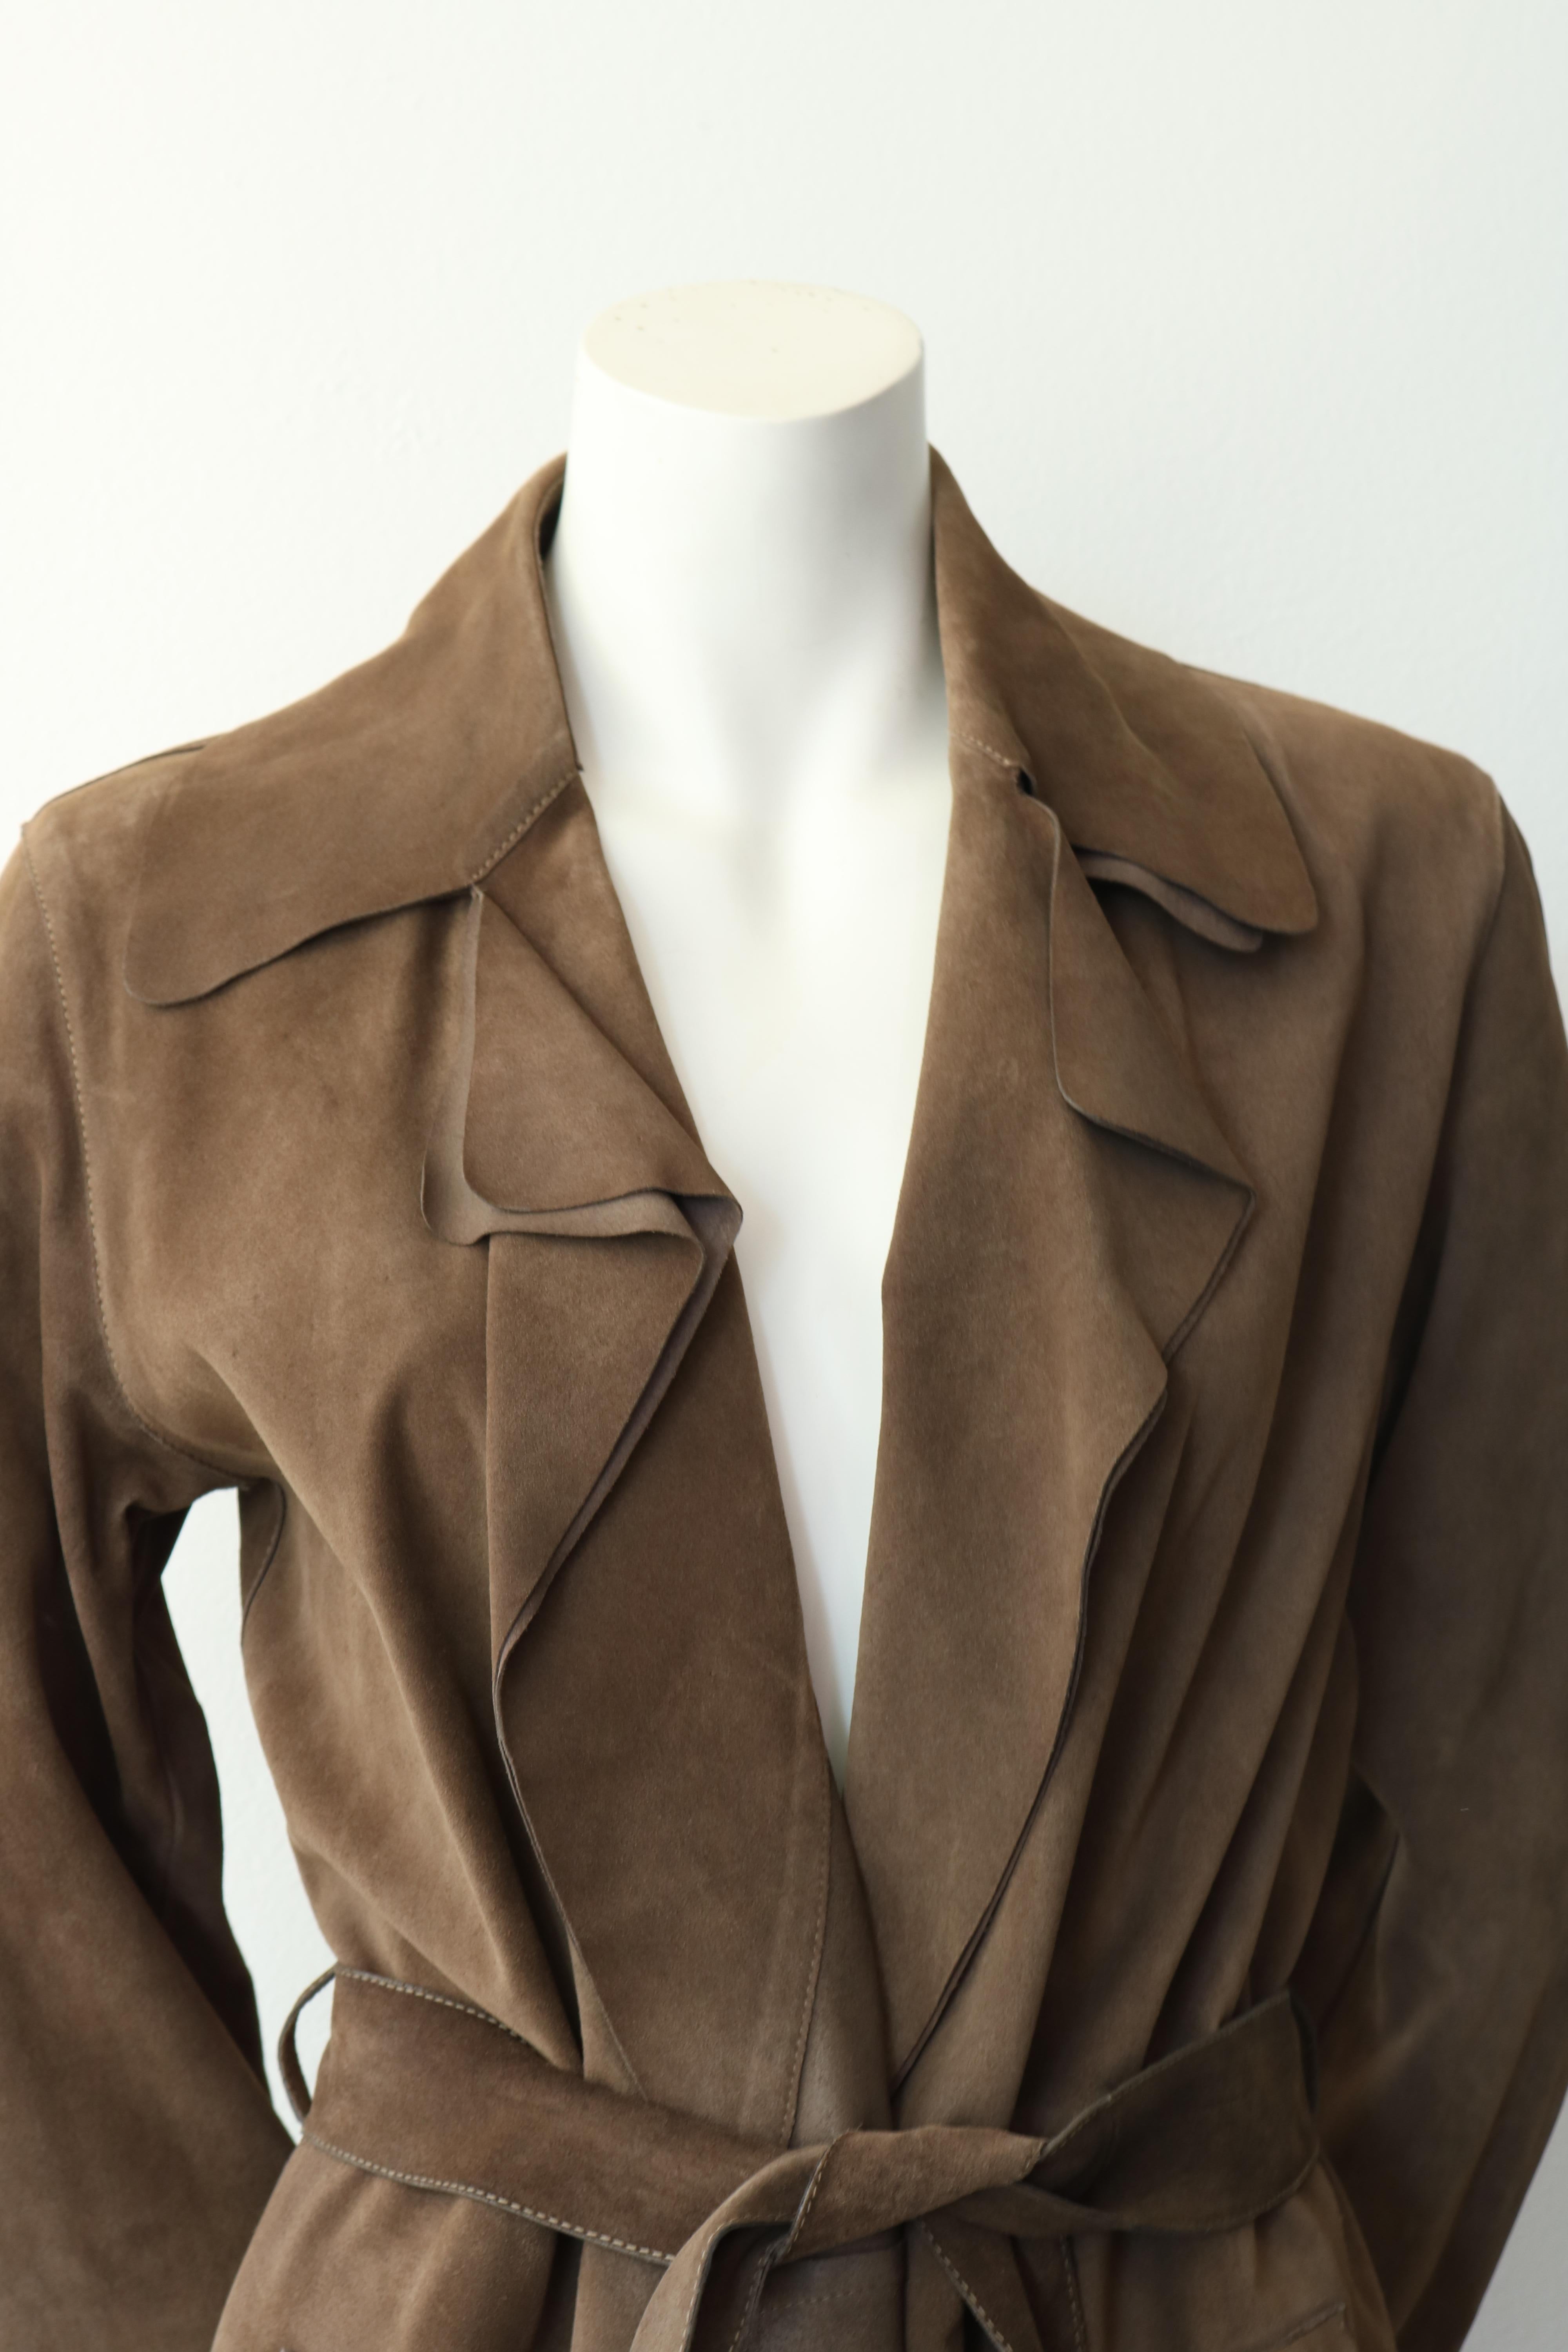 Beautiful brown, leather GUCCI trench coat
-Mint Condition 
-100% leather 
-Size 40
-Made in Italy 
